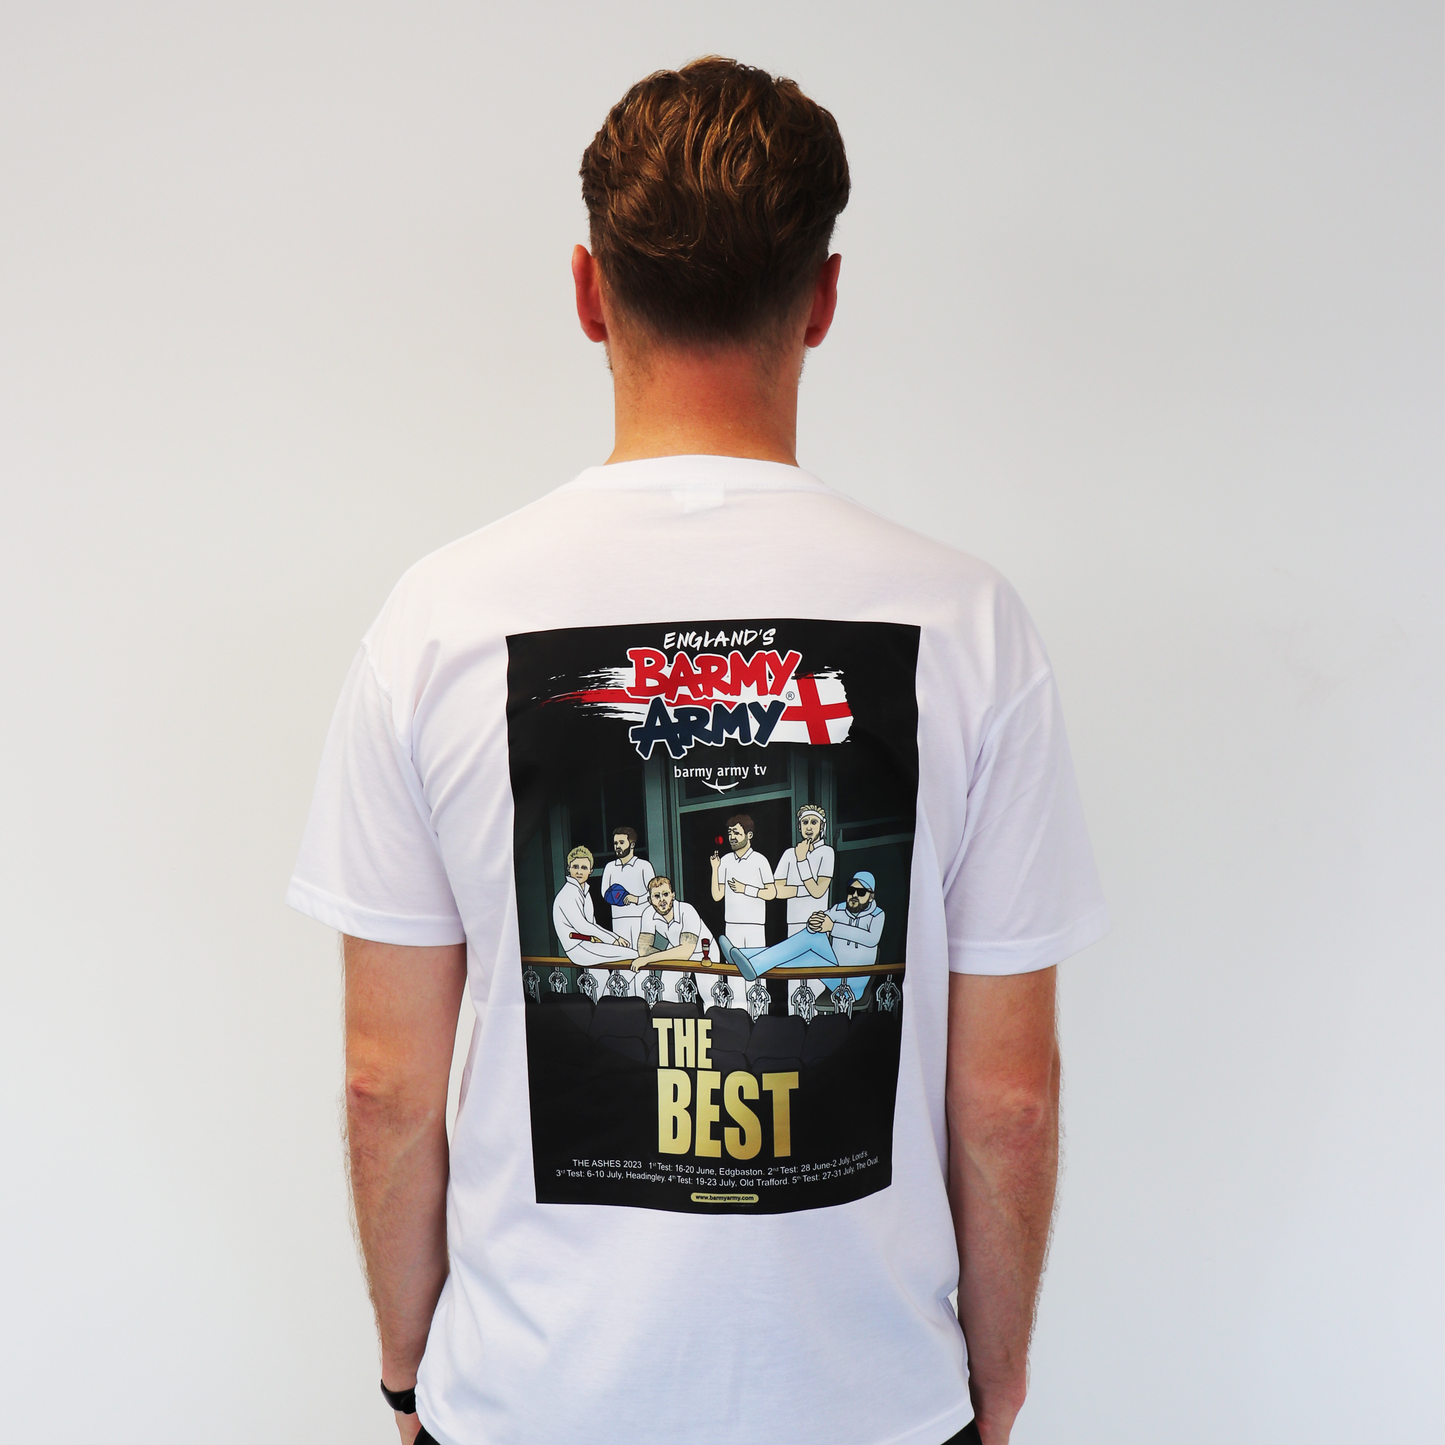 Ashes 2023 Tour Tee - The Best